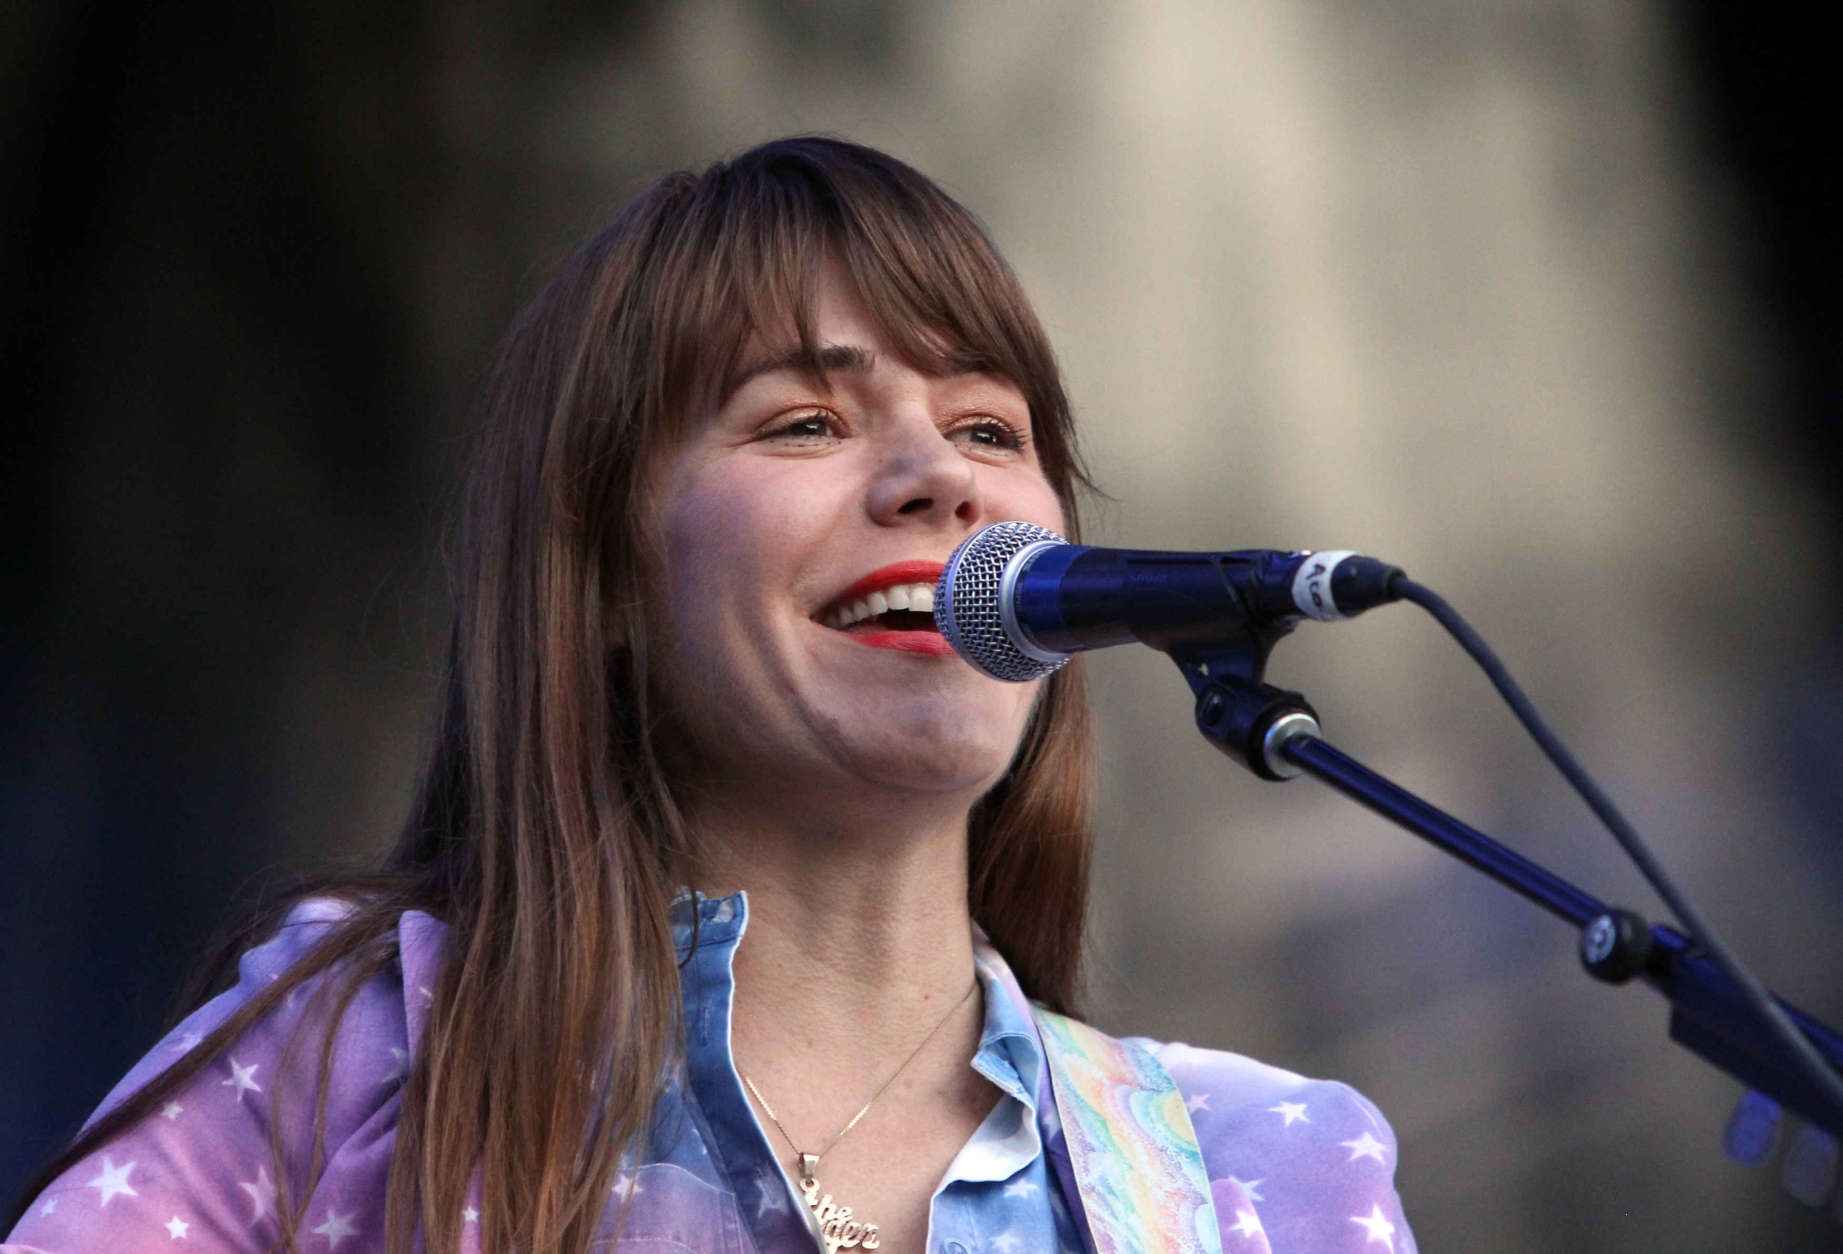 Jenny Lewis performs during Music Midtown 2015 at Piedmont Park on Friday, September 18, 2015, in Atlanta. (Photo by Robb D. Cohen/Invision/AP)